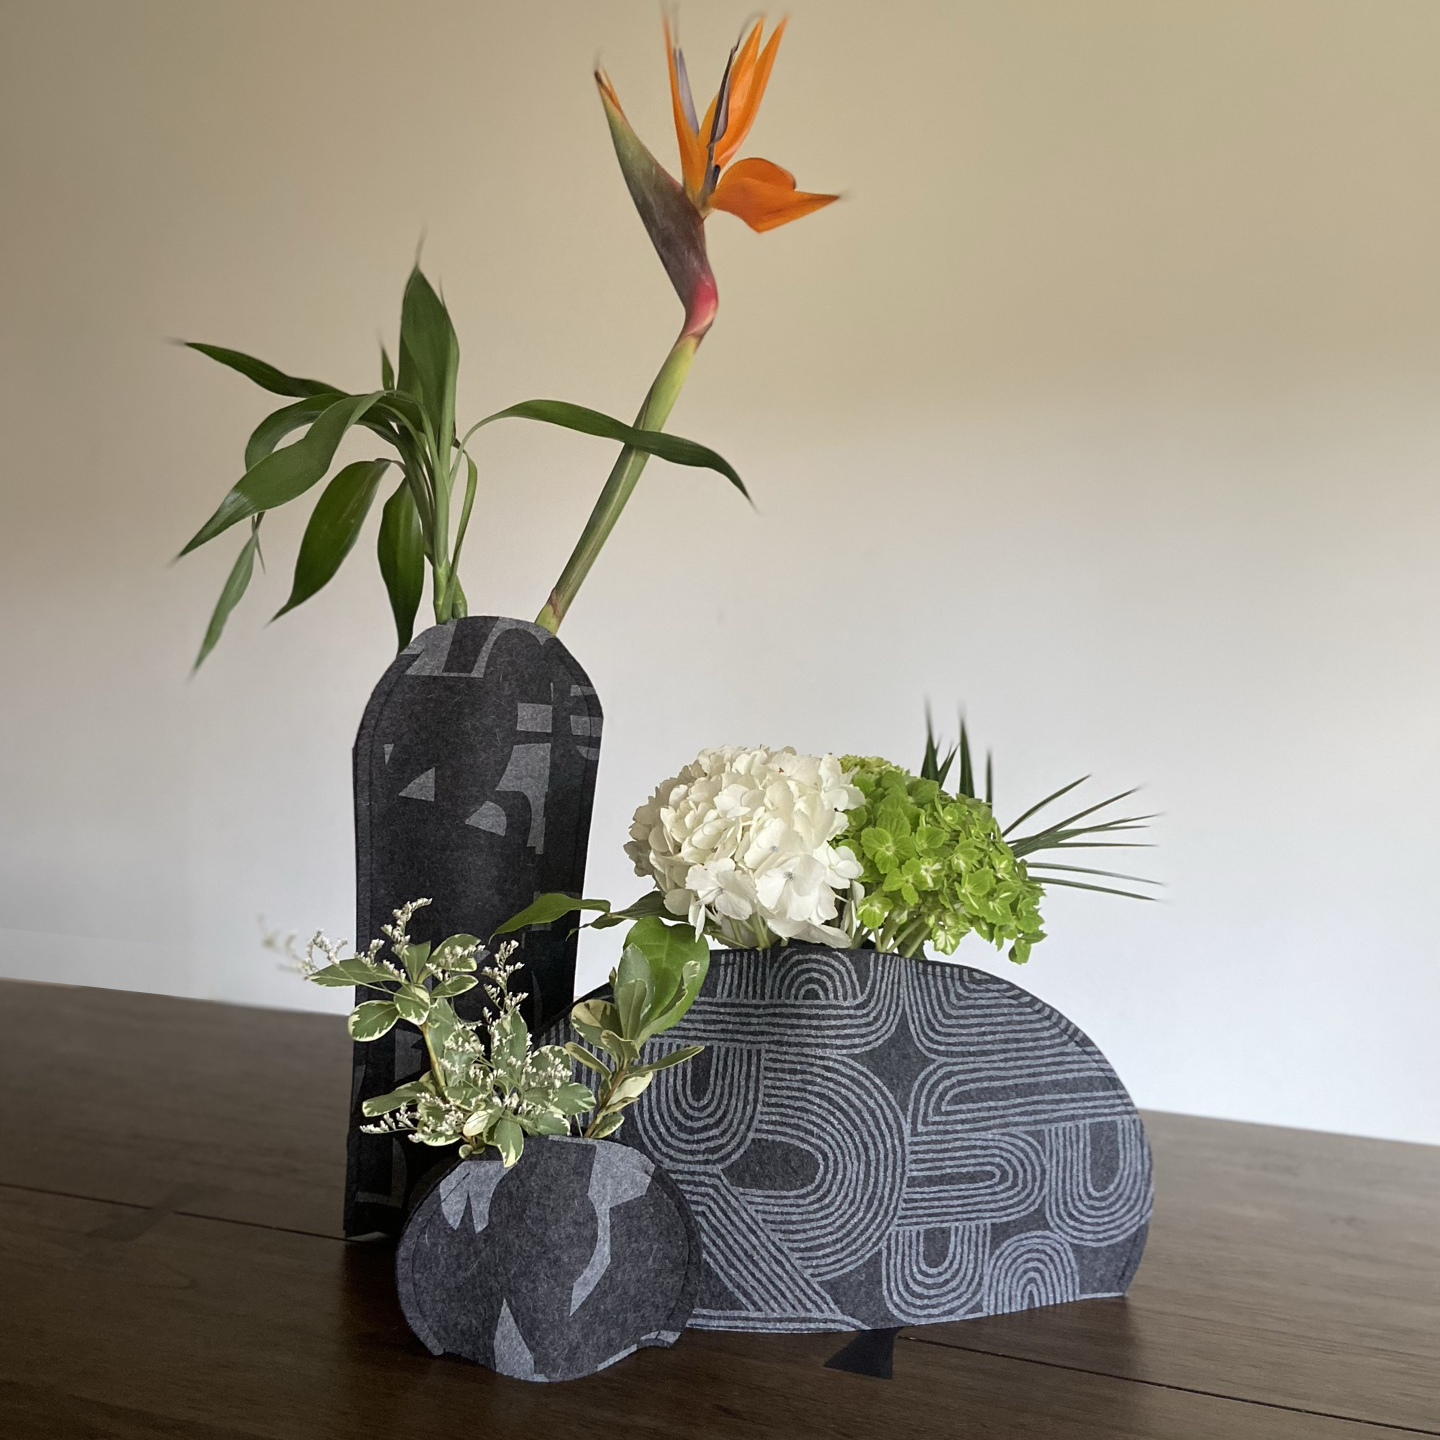 Felt vase sleeve. Handmade, eco-friendly, and sustainable decor. Upcycle recycling through a flexible designed vase cover. This is the triple vase selection of charcoal felt with the Fragment pattern for the tall and round vase sleeve and Rake pattern for the wide.